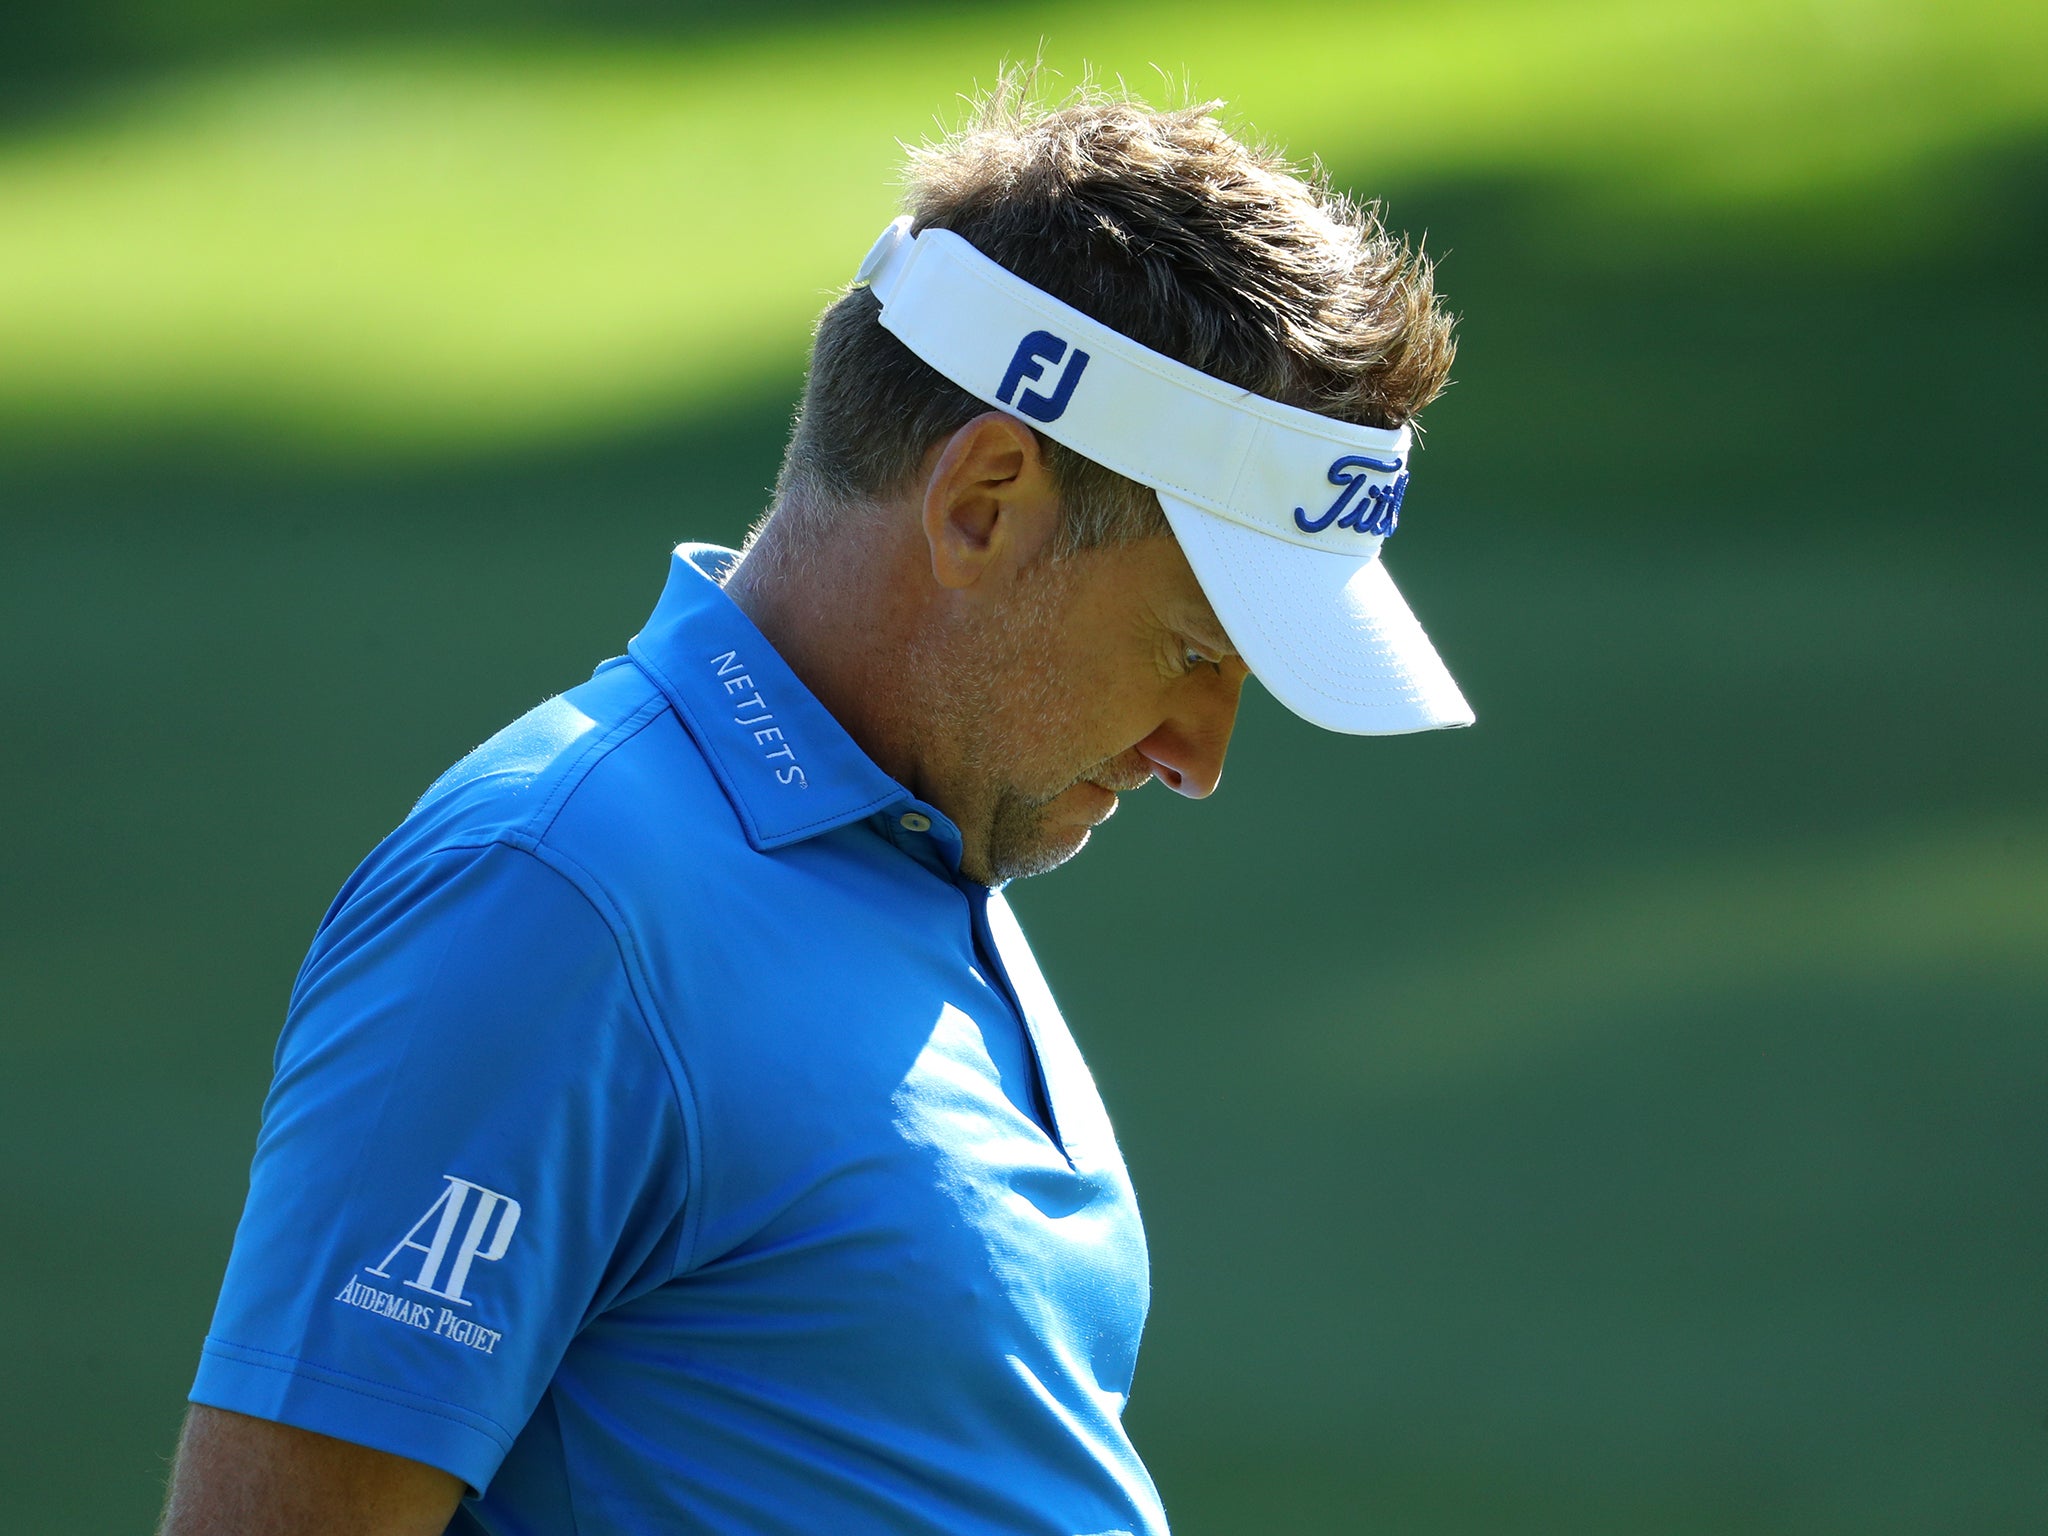 Poulter is aiming to return for the Ryder Cup after missing 2016 through injury